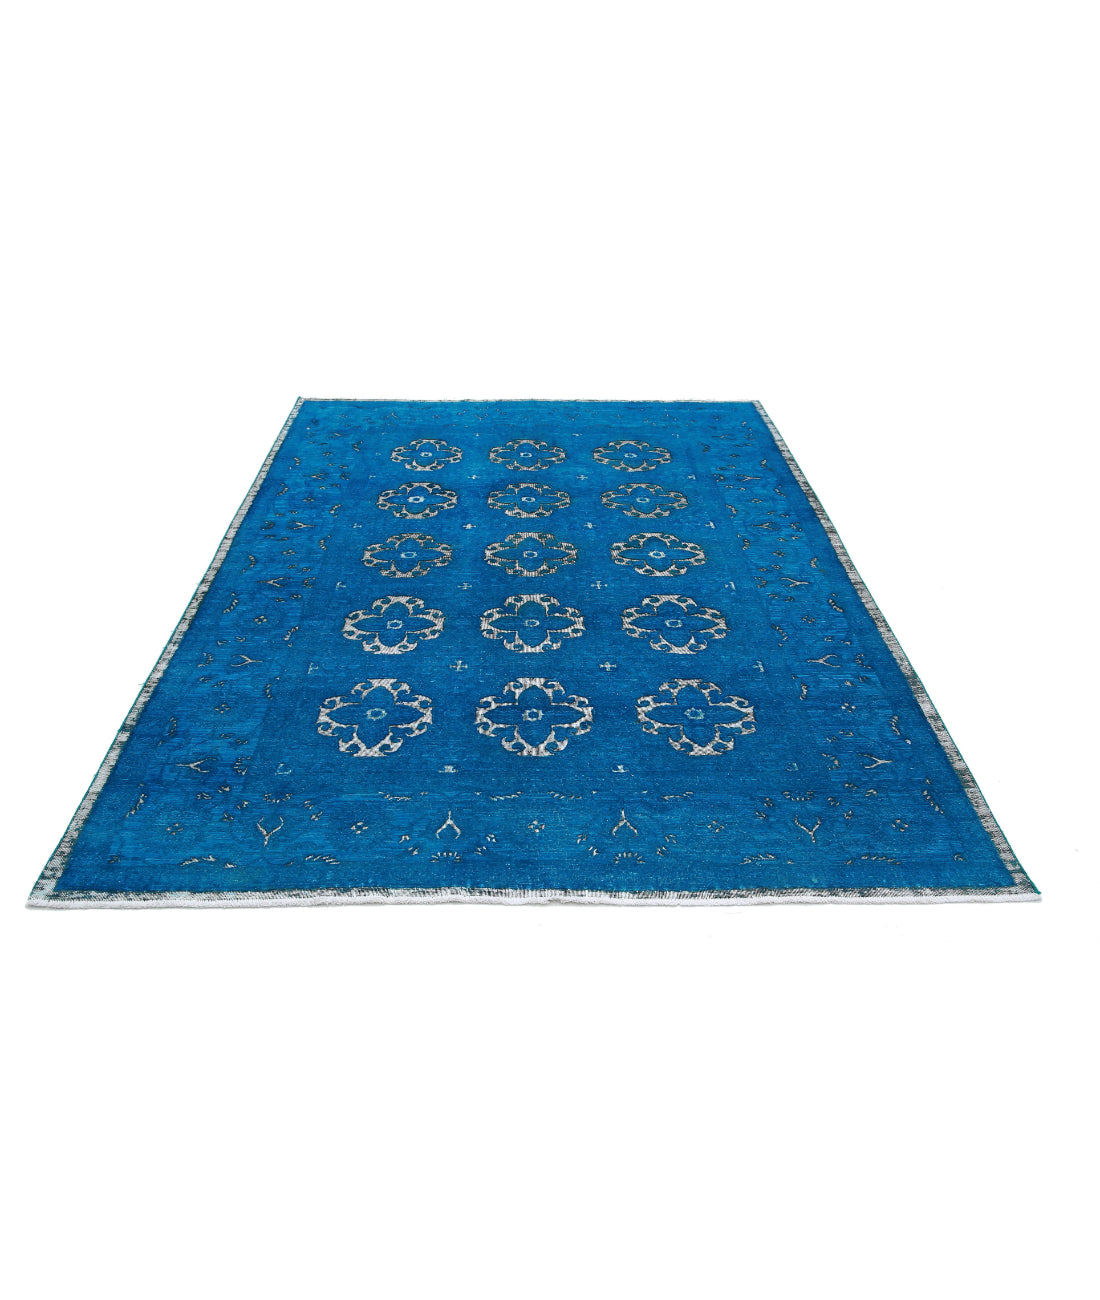 Hand Knotted Onyx Wool Rug - 6'2'' x 8'8'' 6'2'' x 8'8'' (185 X 260) / Teal / Teal